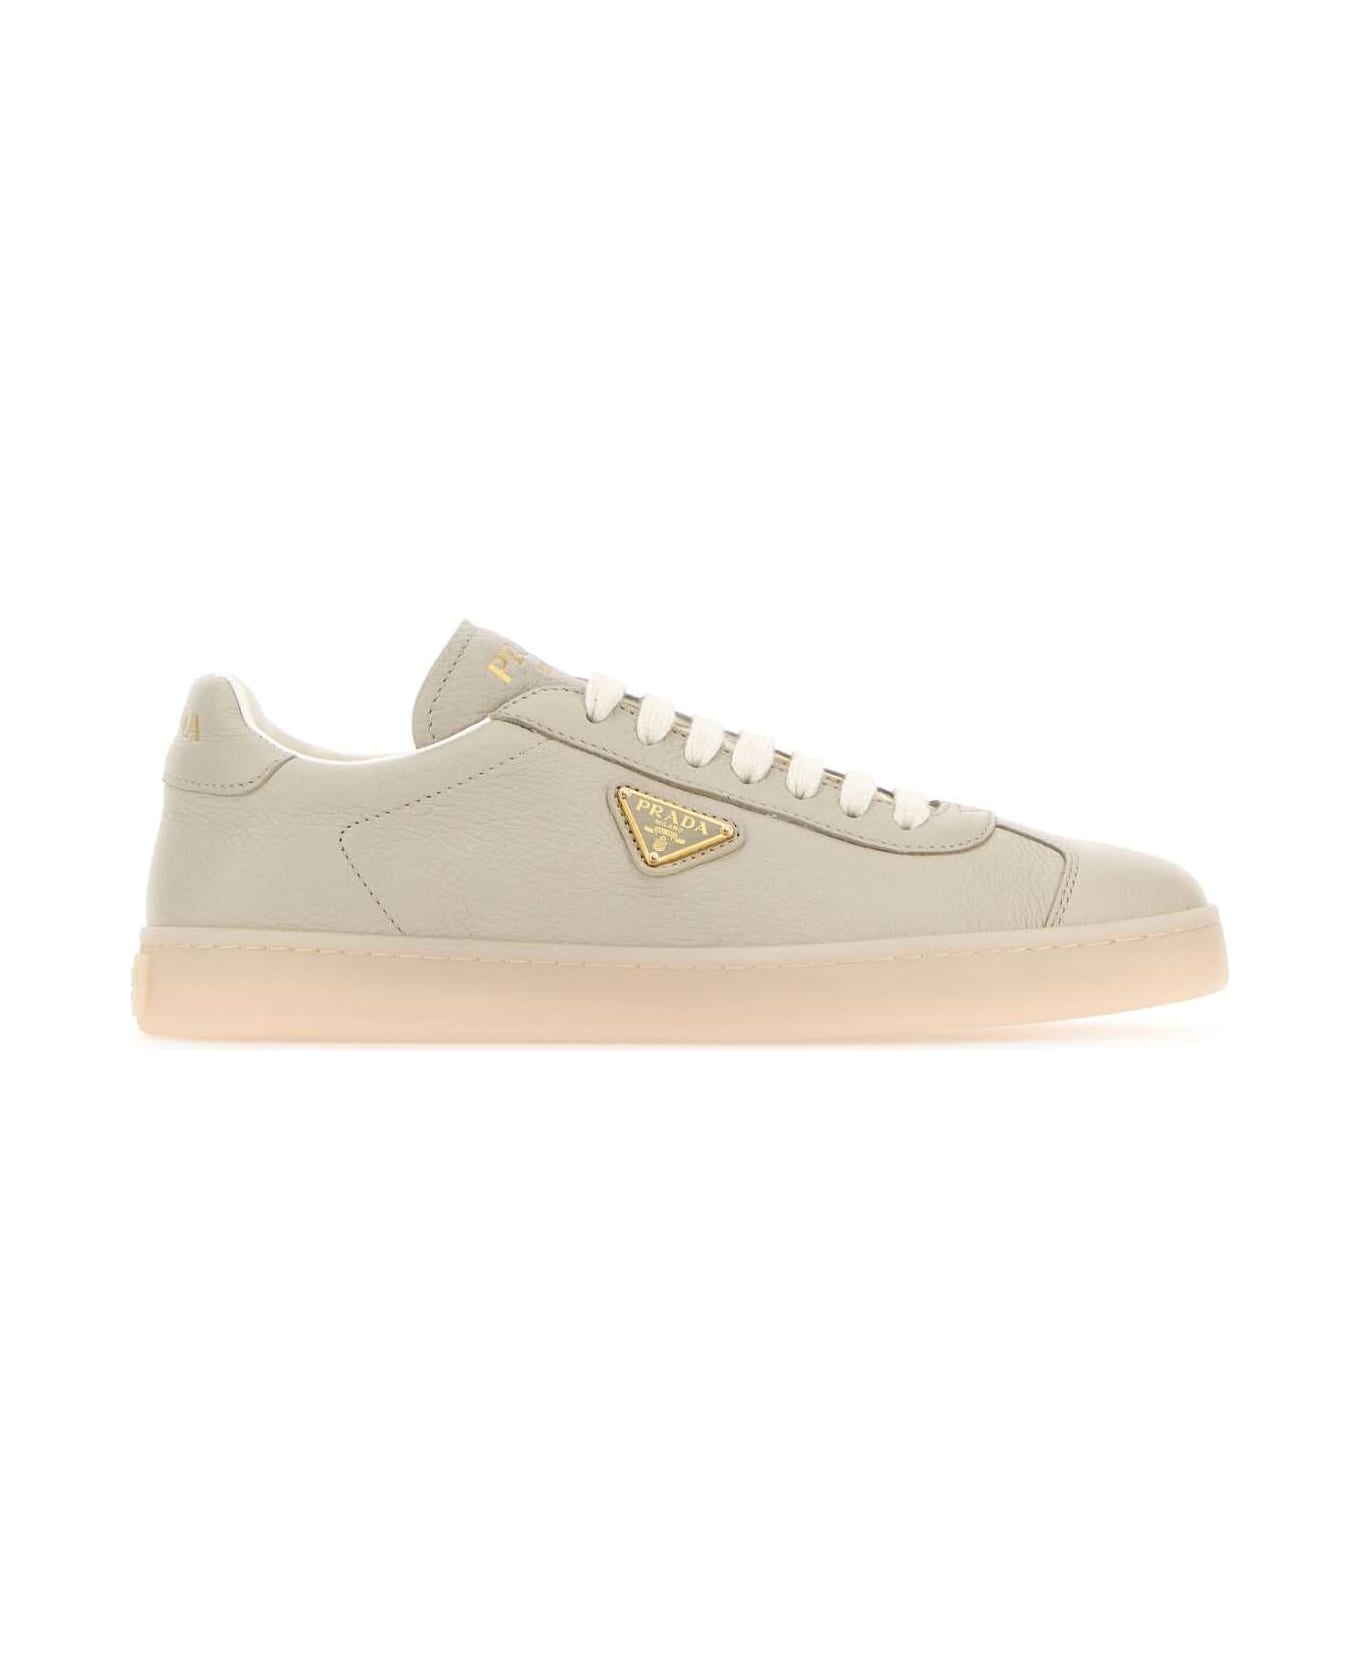 Prada Sand Leather Downtown Sneakers - POMICE スニーカー